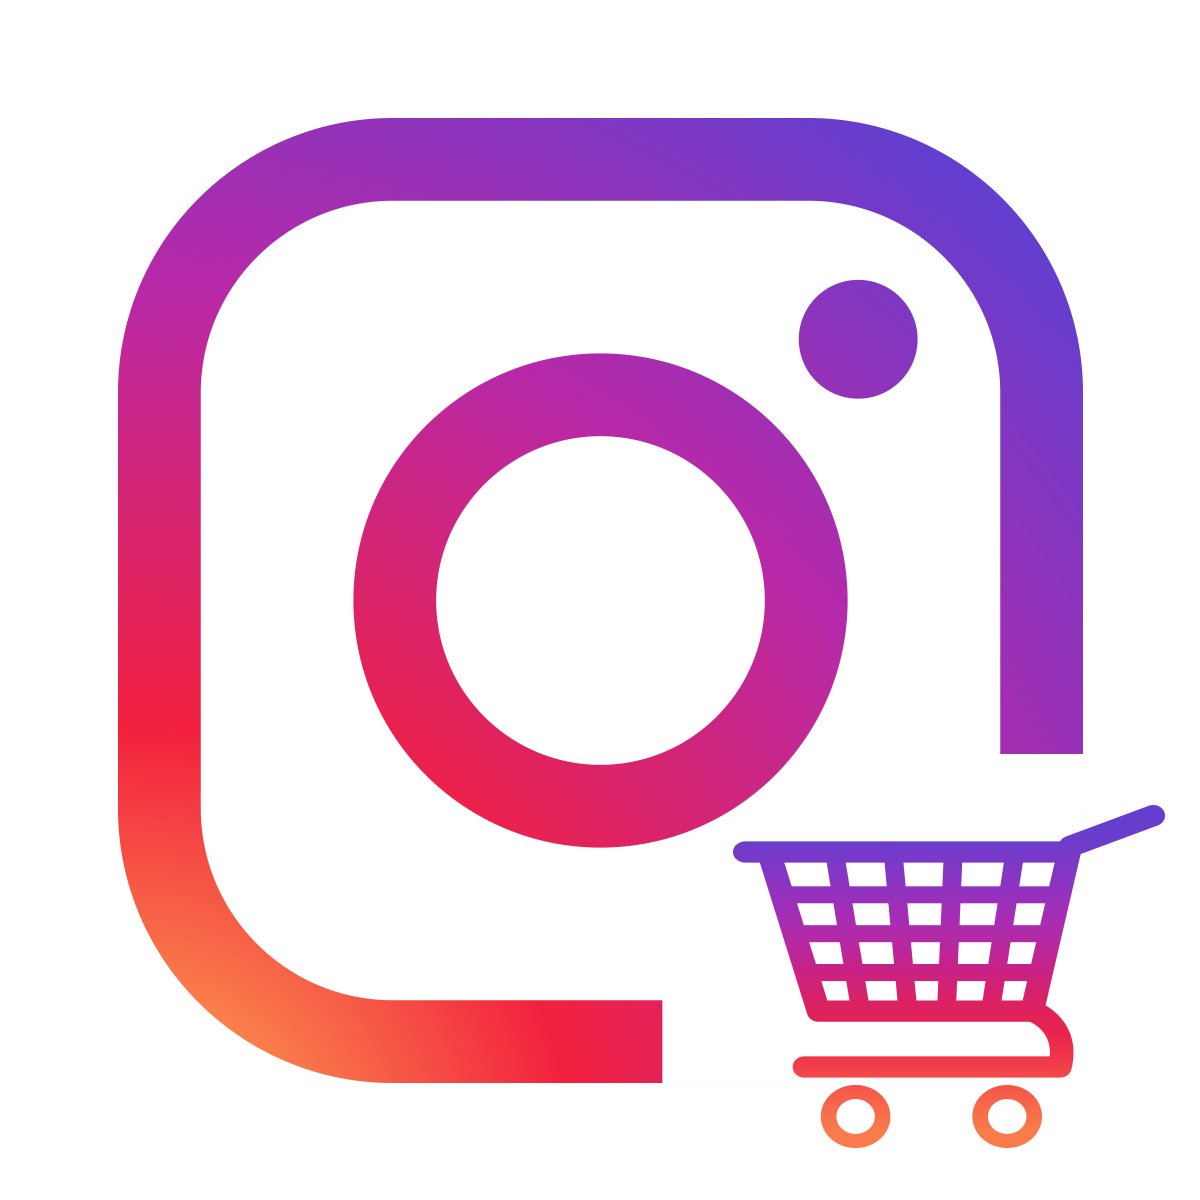 instagram app clipart 10 free Cliparts | Download images ...